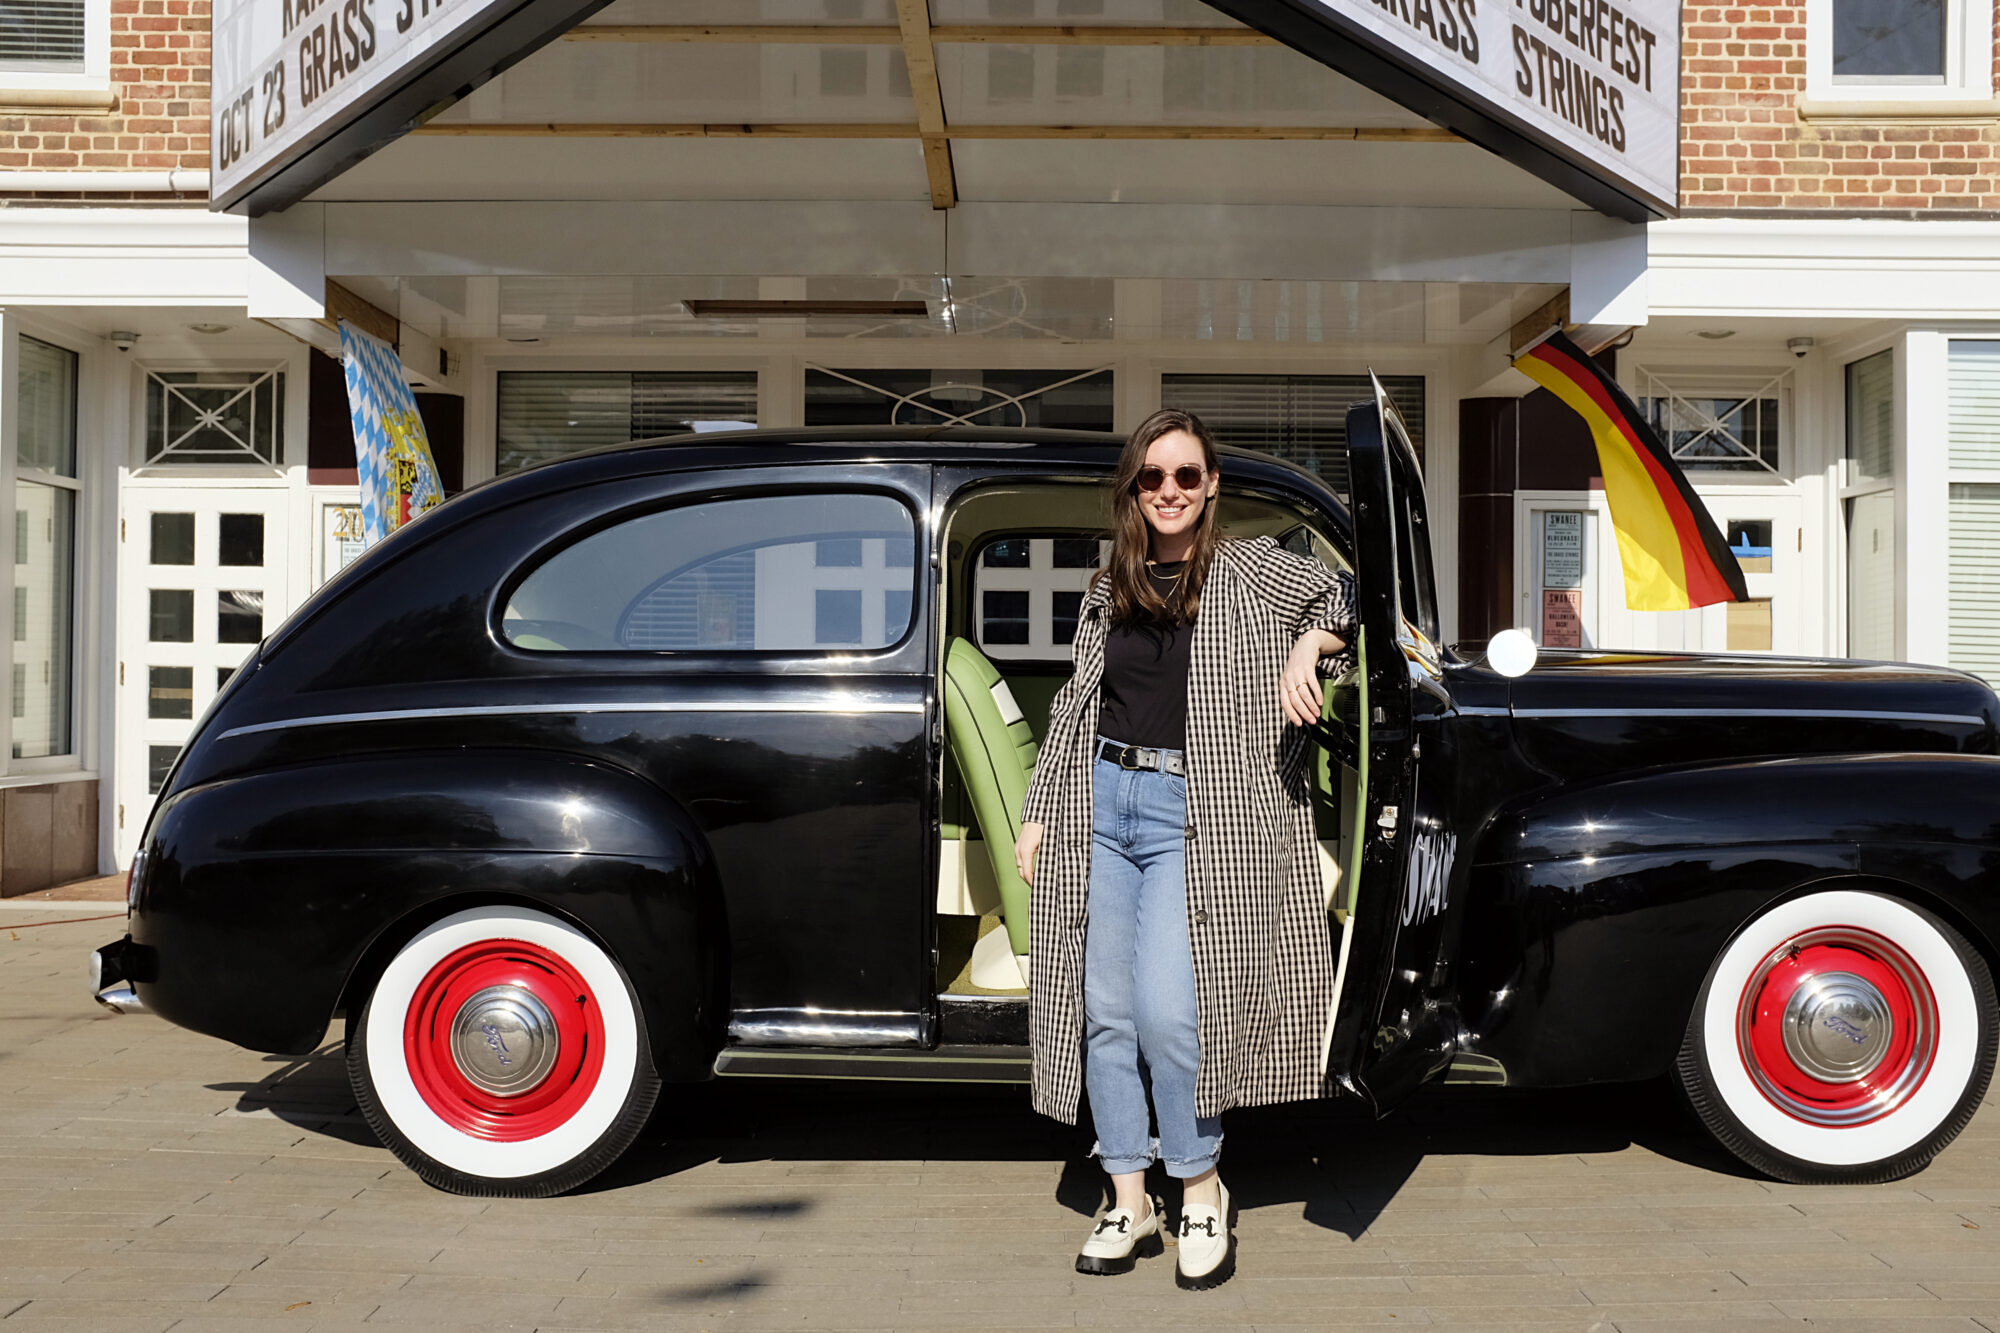 Alyssa stands outside of a vintage car in Kannapolis